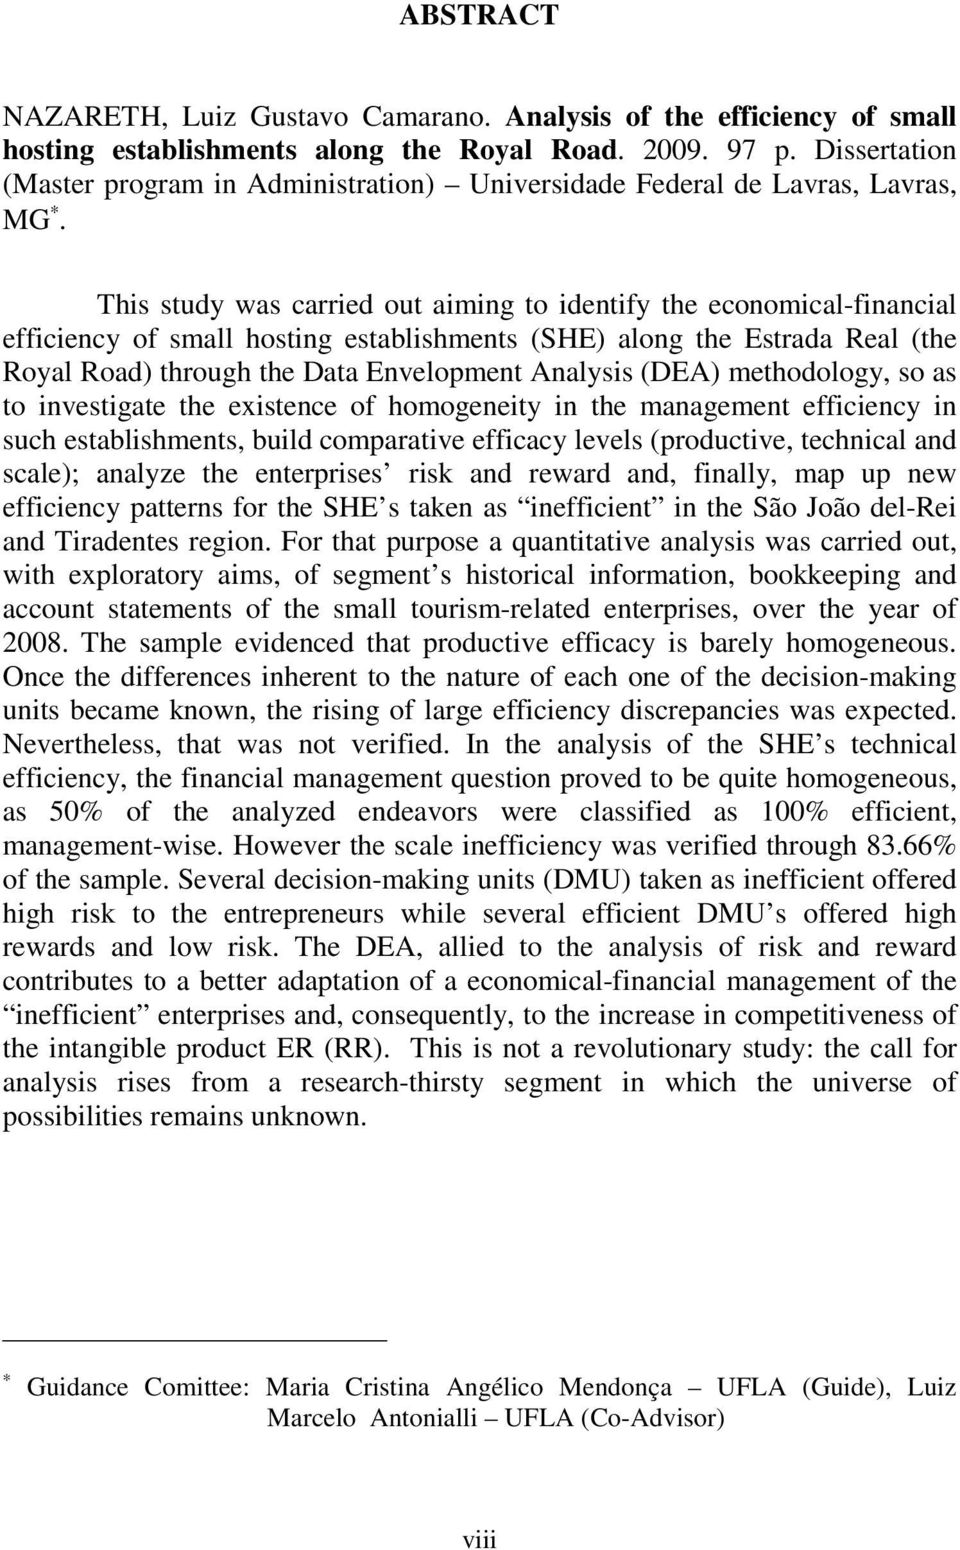 This study was carried out aiming to identify the economical-financial efficiency of small hosting establishments (SHE) along the Estrada Real (the Royal Road) through the Data Envelopment Analysis